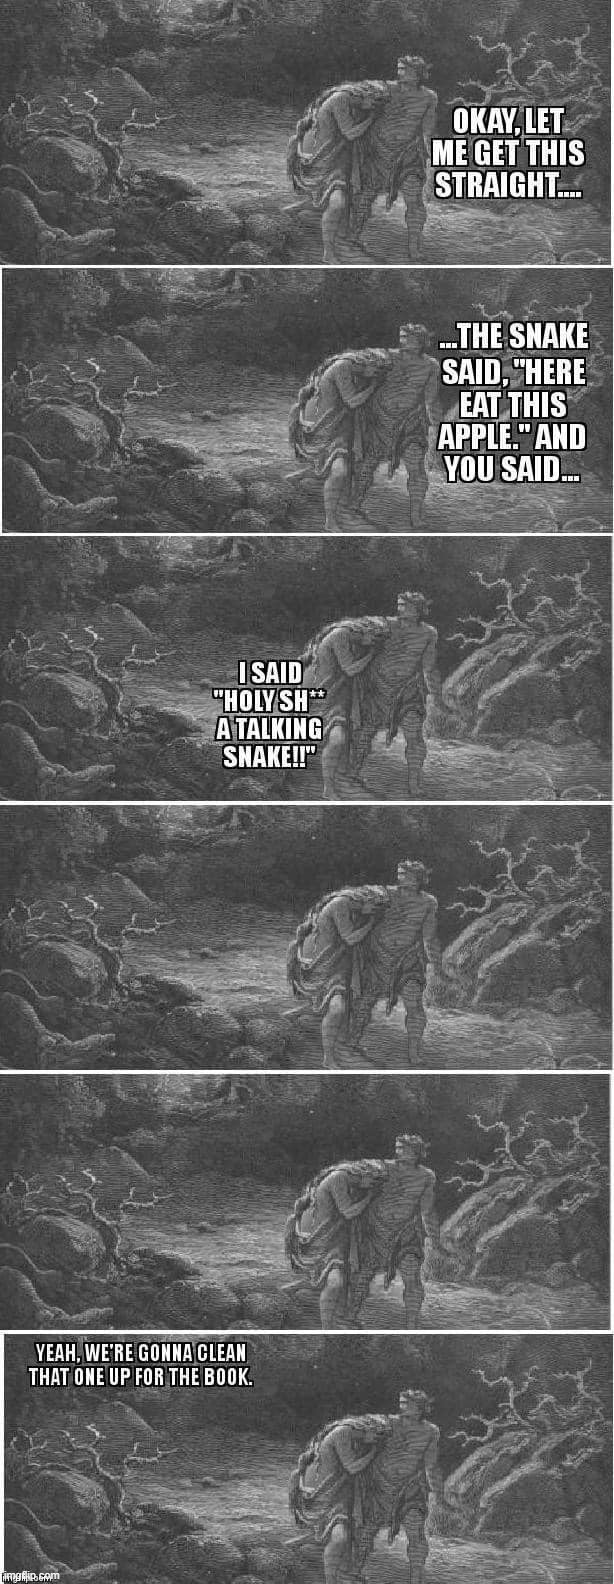 Holy shit a talking snake | image tagged in holy shit a talking snake | made w/ Imgflip meme maker